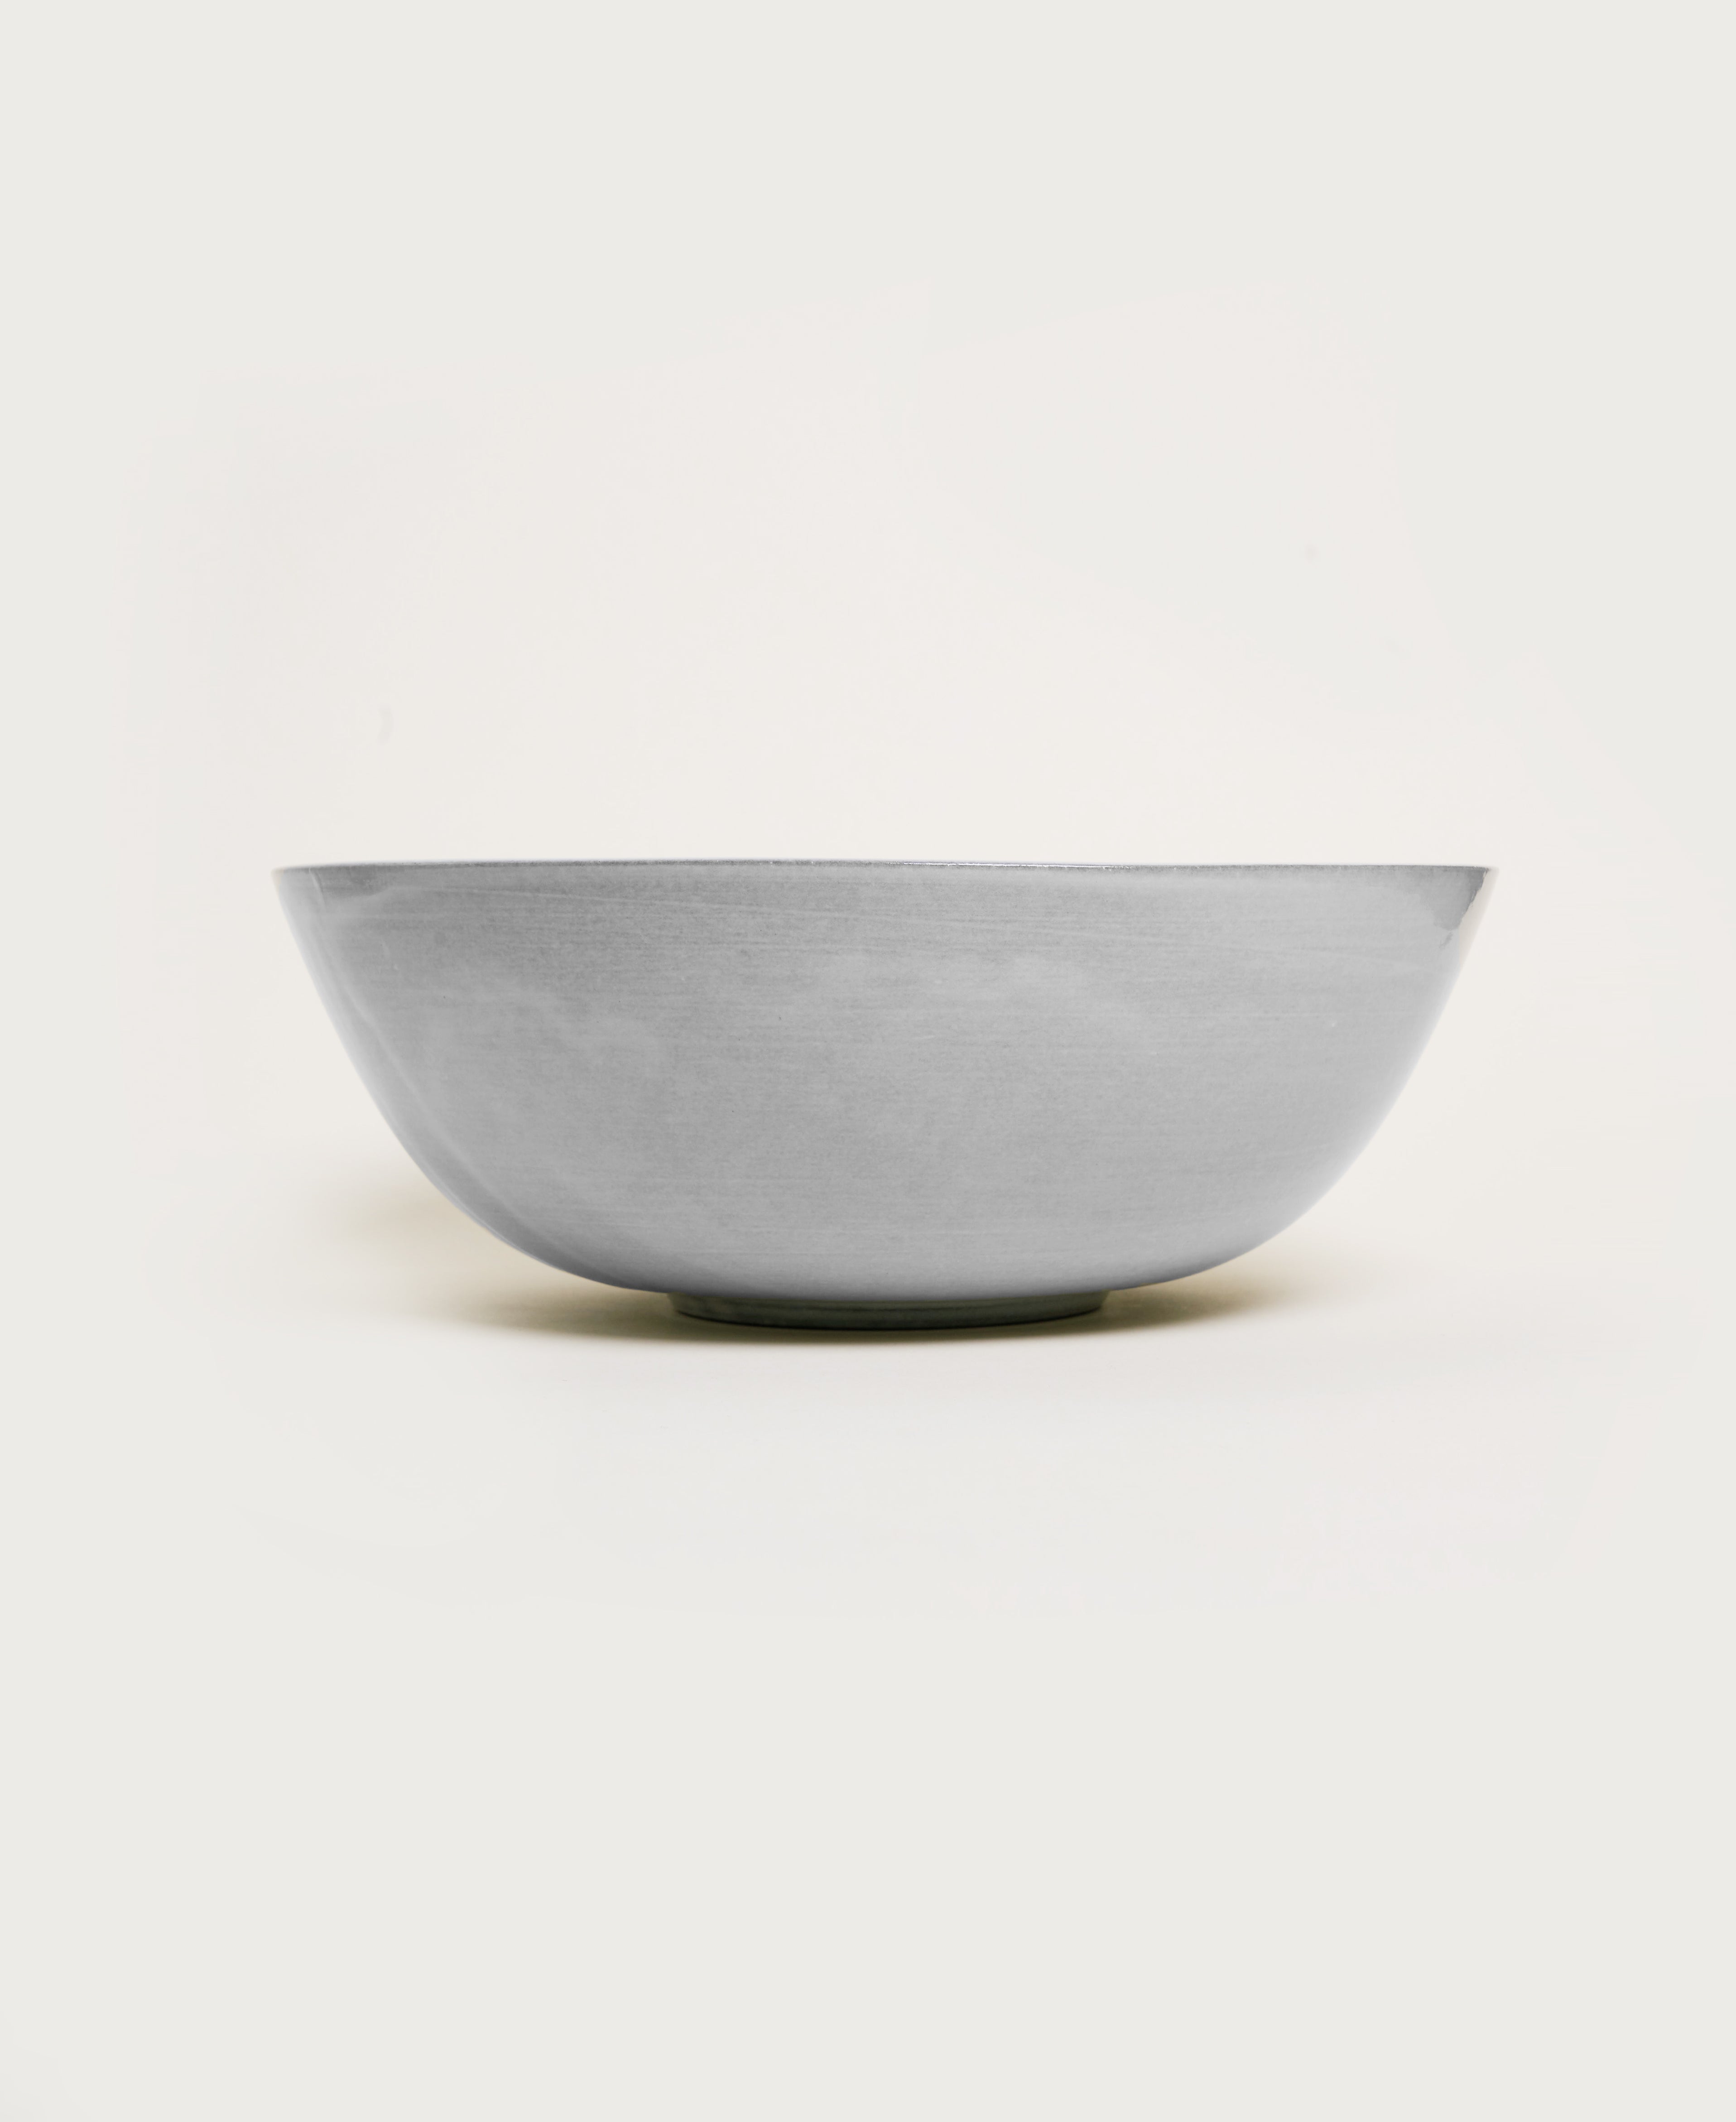   Small Round Serving Bowl  